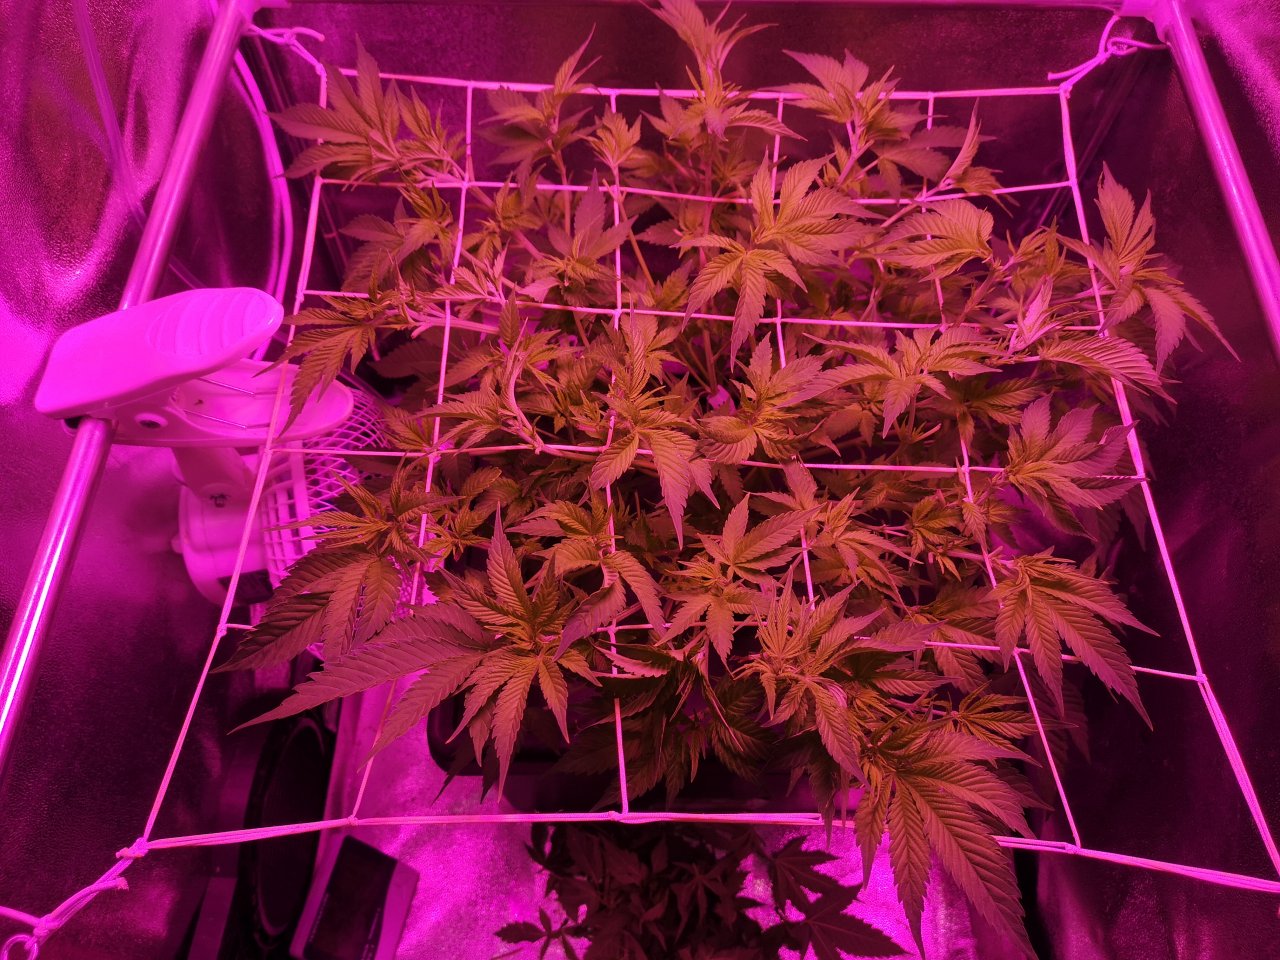 Jack Herer - w10d2 - helped her see the light